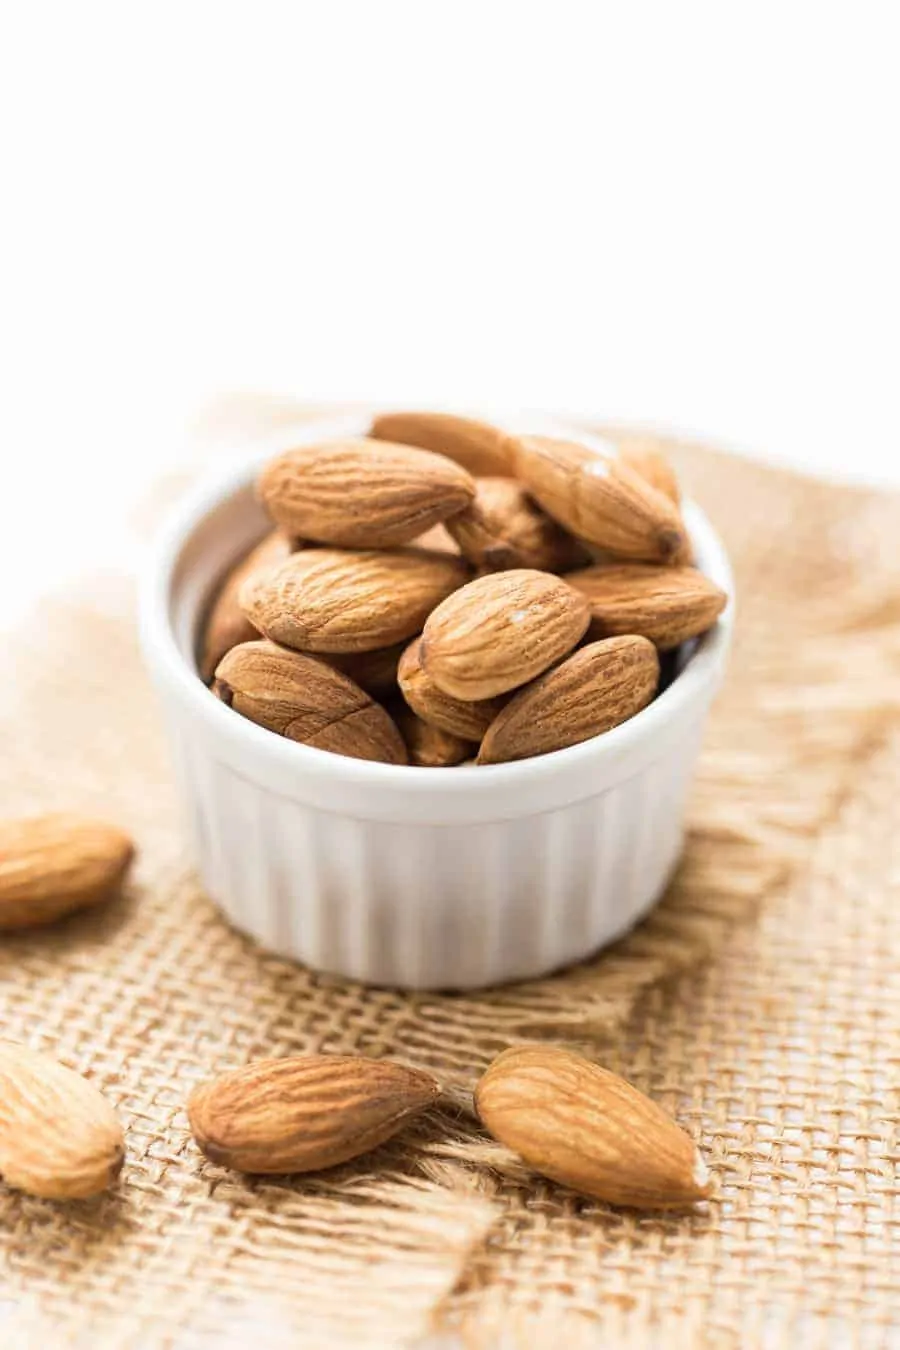 Whole Almonds from Bob's Red Mill